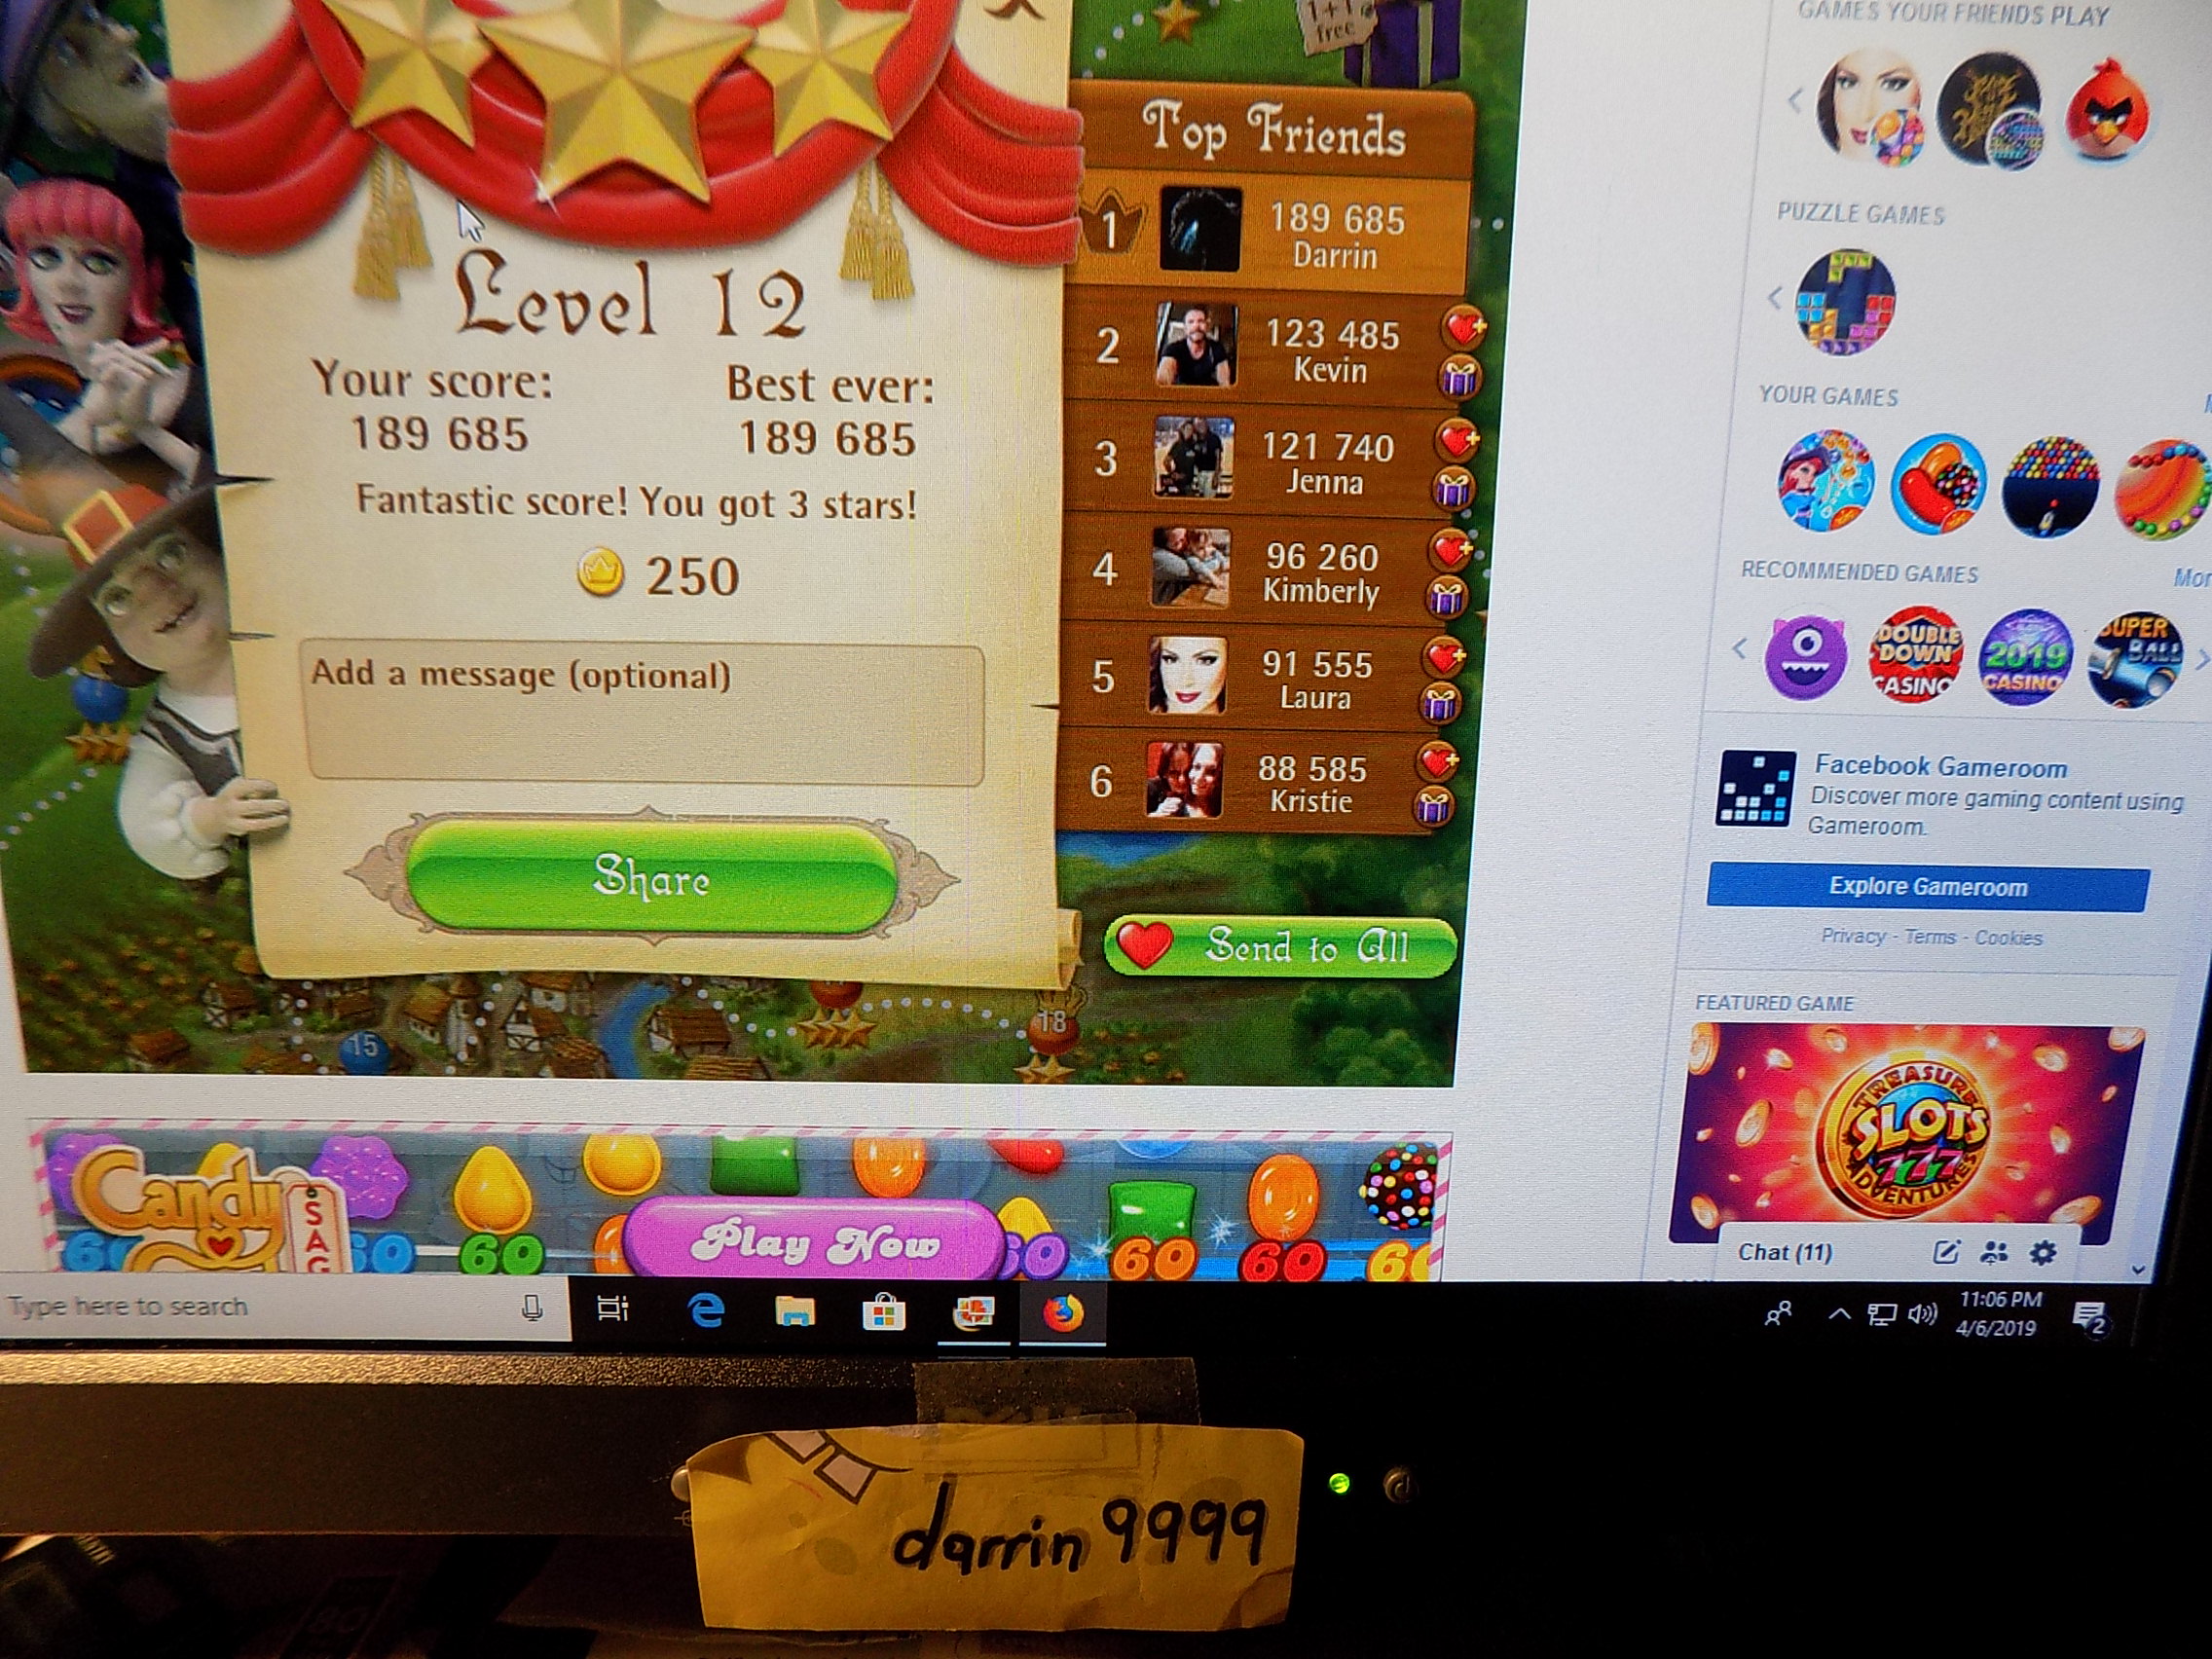 darrin9999: Bubble Witch Saga: Level 12 (Web) 189,685 points on 2019-04-06 21:07:56